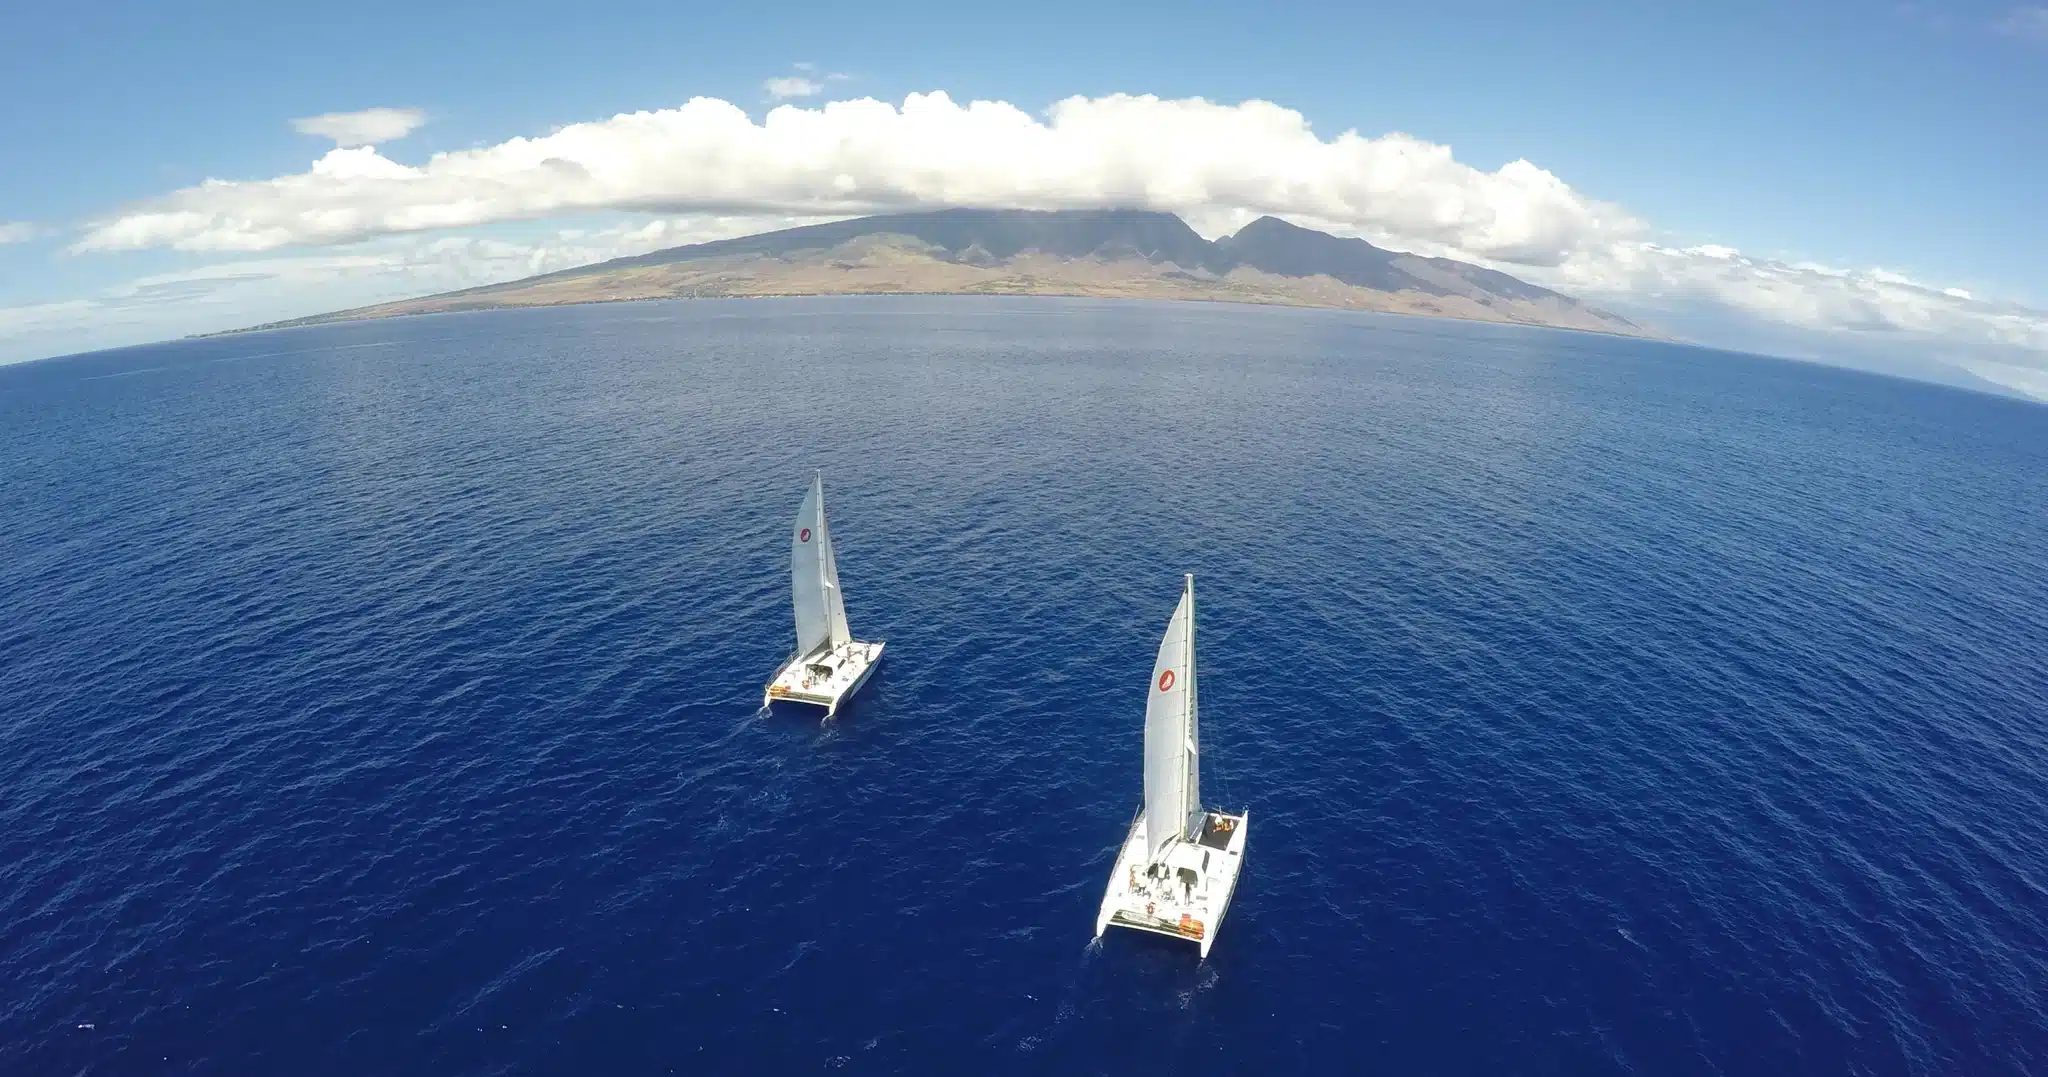 Molokini Snorkel & Performance Sail is a Water Activity located in the city of Kula on Maui, Hawaii